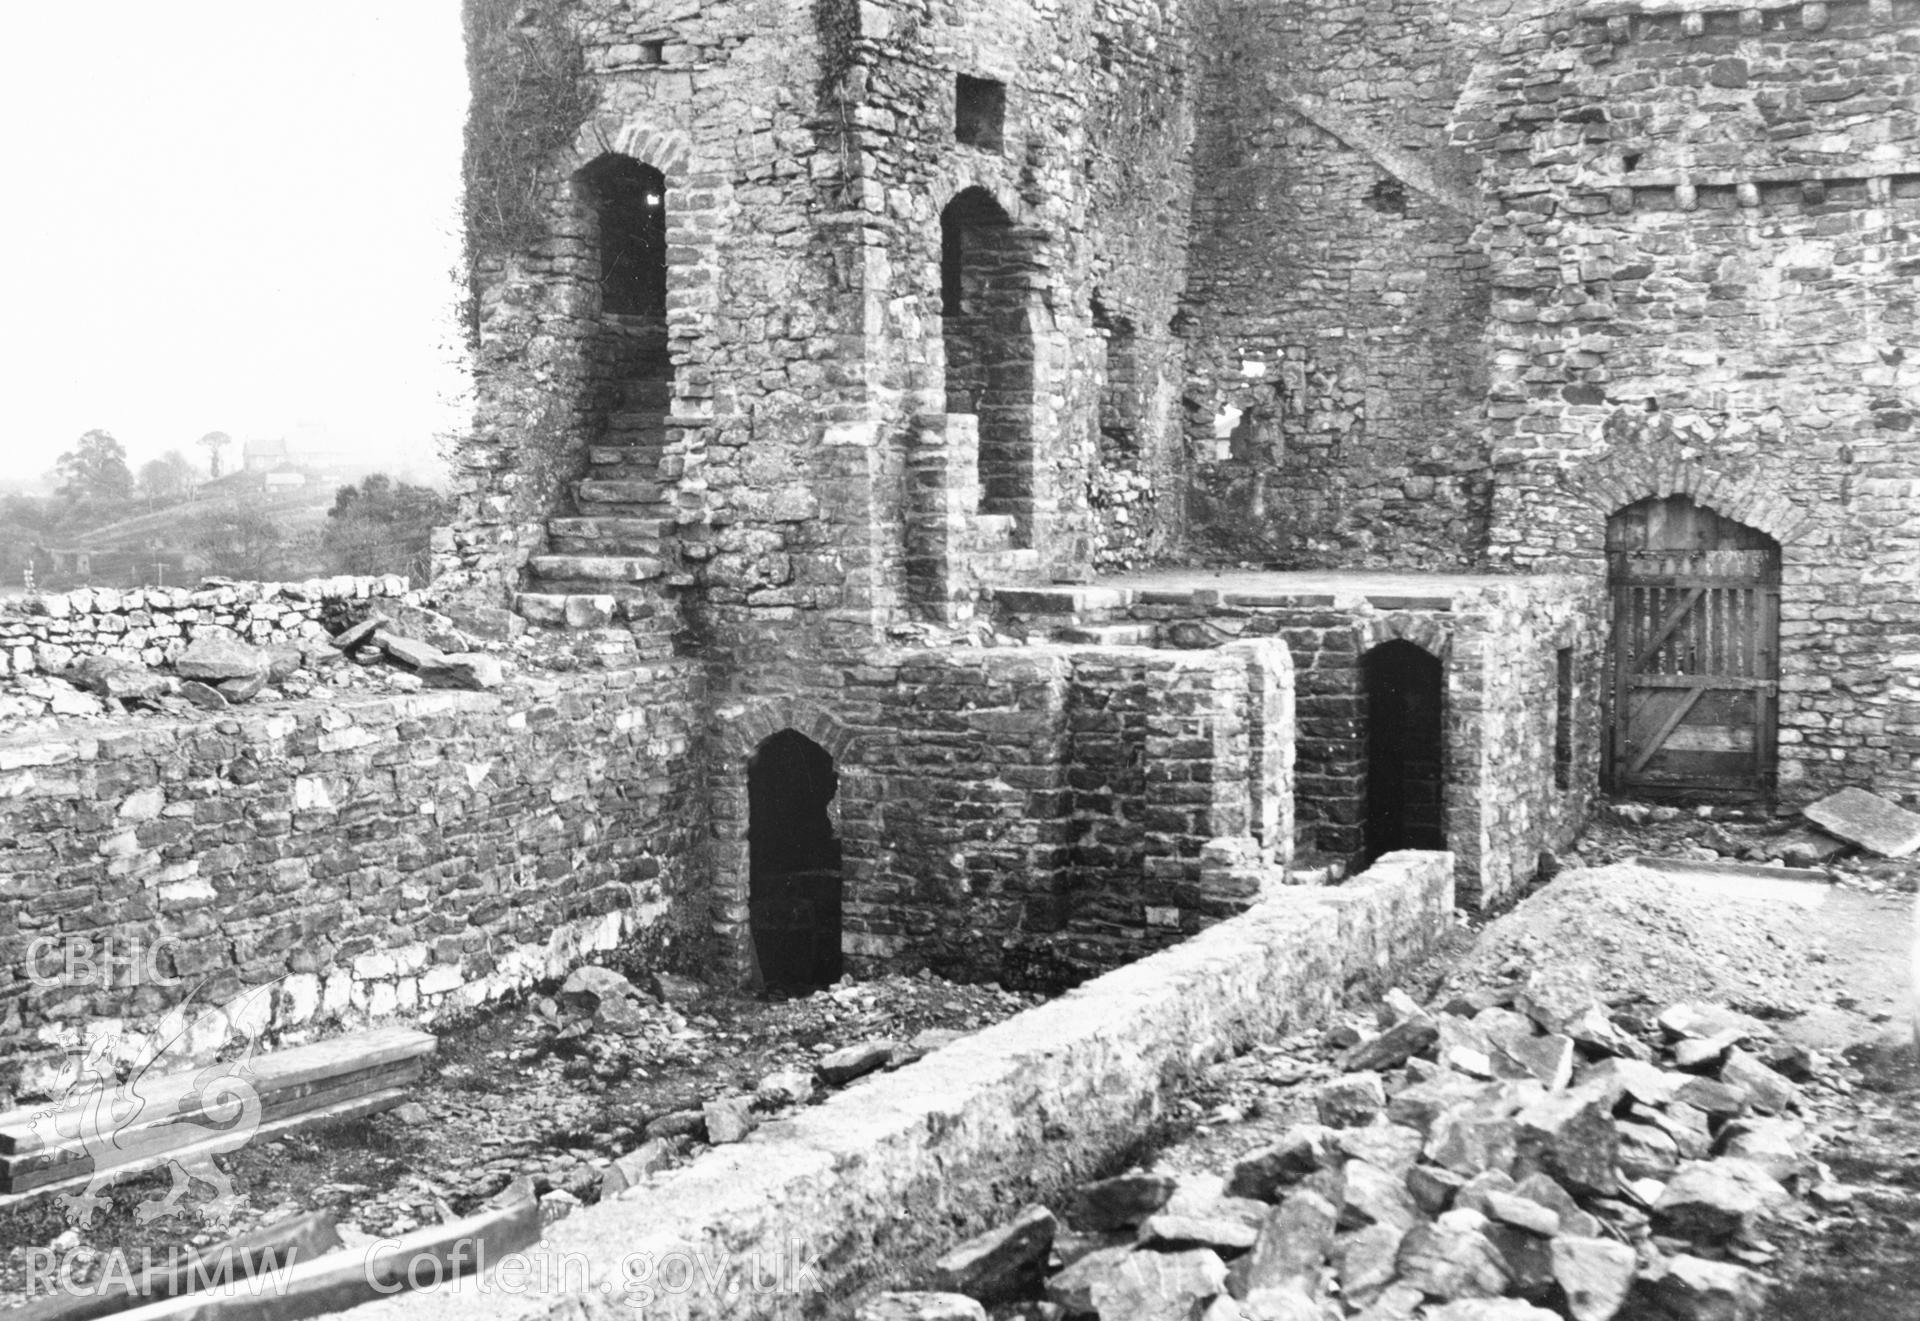 Exterior view of Pembroke Castle before restoration taken in 1929 by the Office of Works.